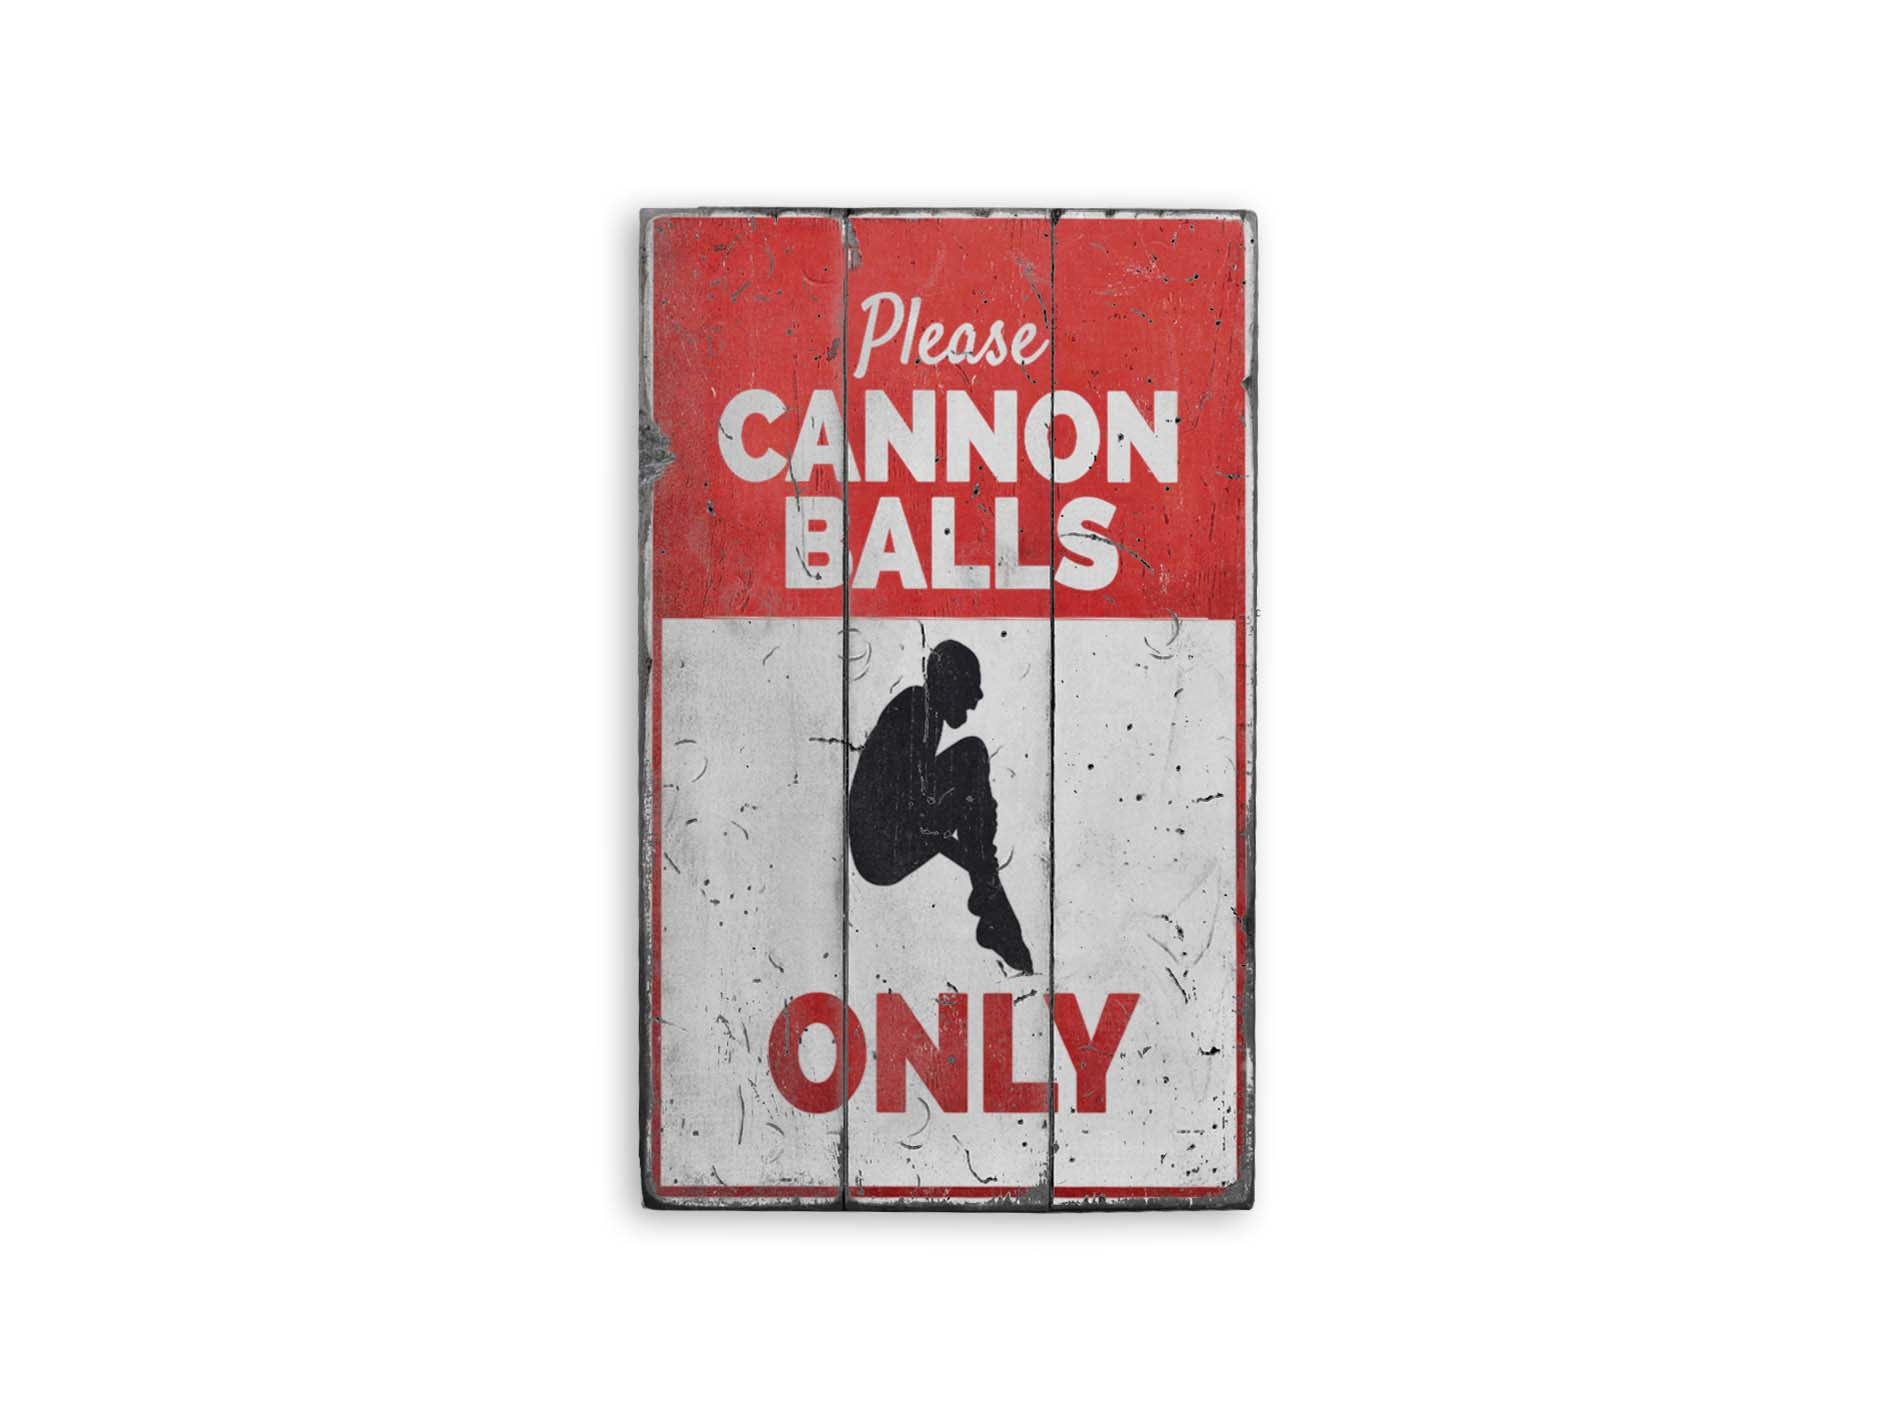 Cannon Balls Only Rustic Wood Sign